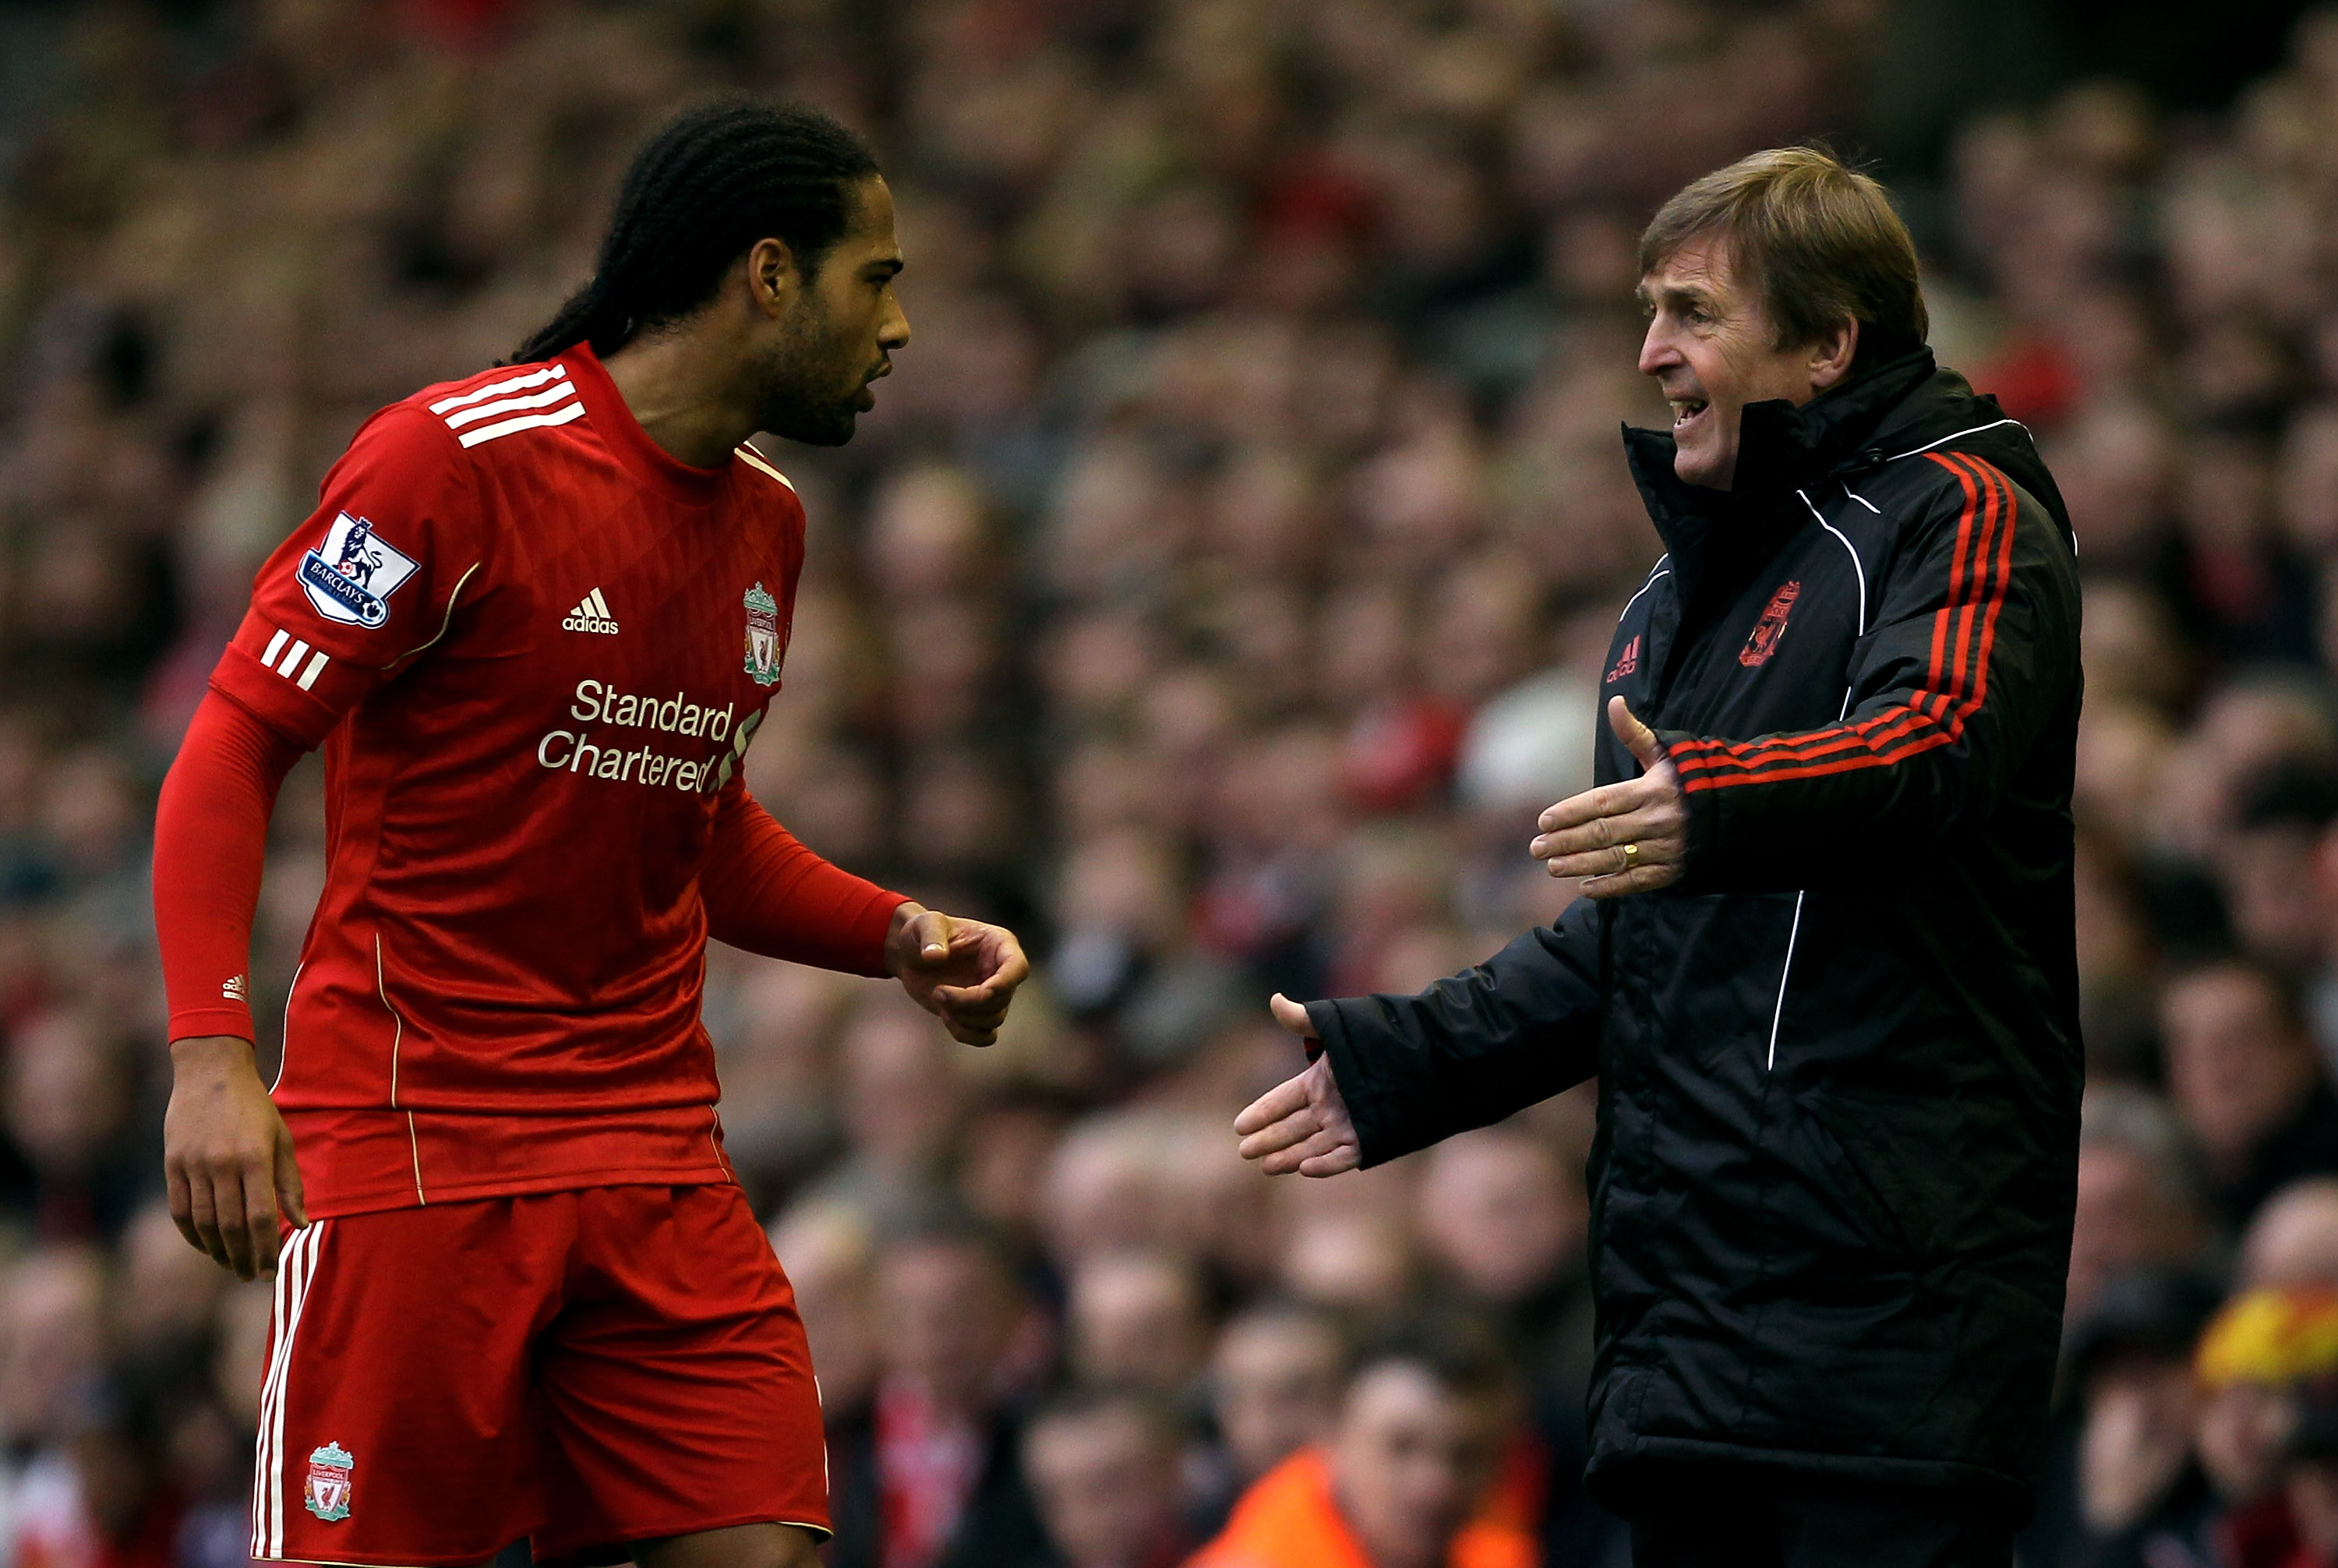 LIVERPOOL, ENGLAND - JANUARY 16:  Liverpool Manager Kenny Dalglish issues instructions to Glen Johnson during the Barclays Premier League match between Liverpool and Everton at Anfield on January 16, 2011 in Liverpool, England.  (Photo by Alex Livesey/Get